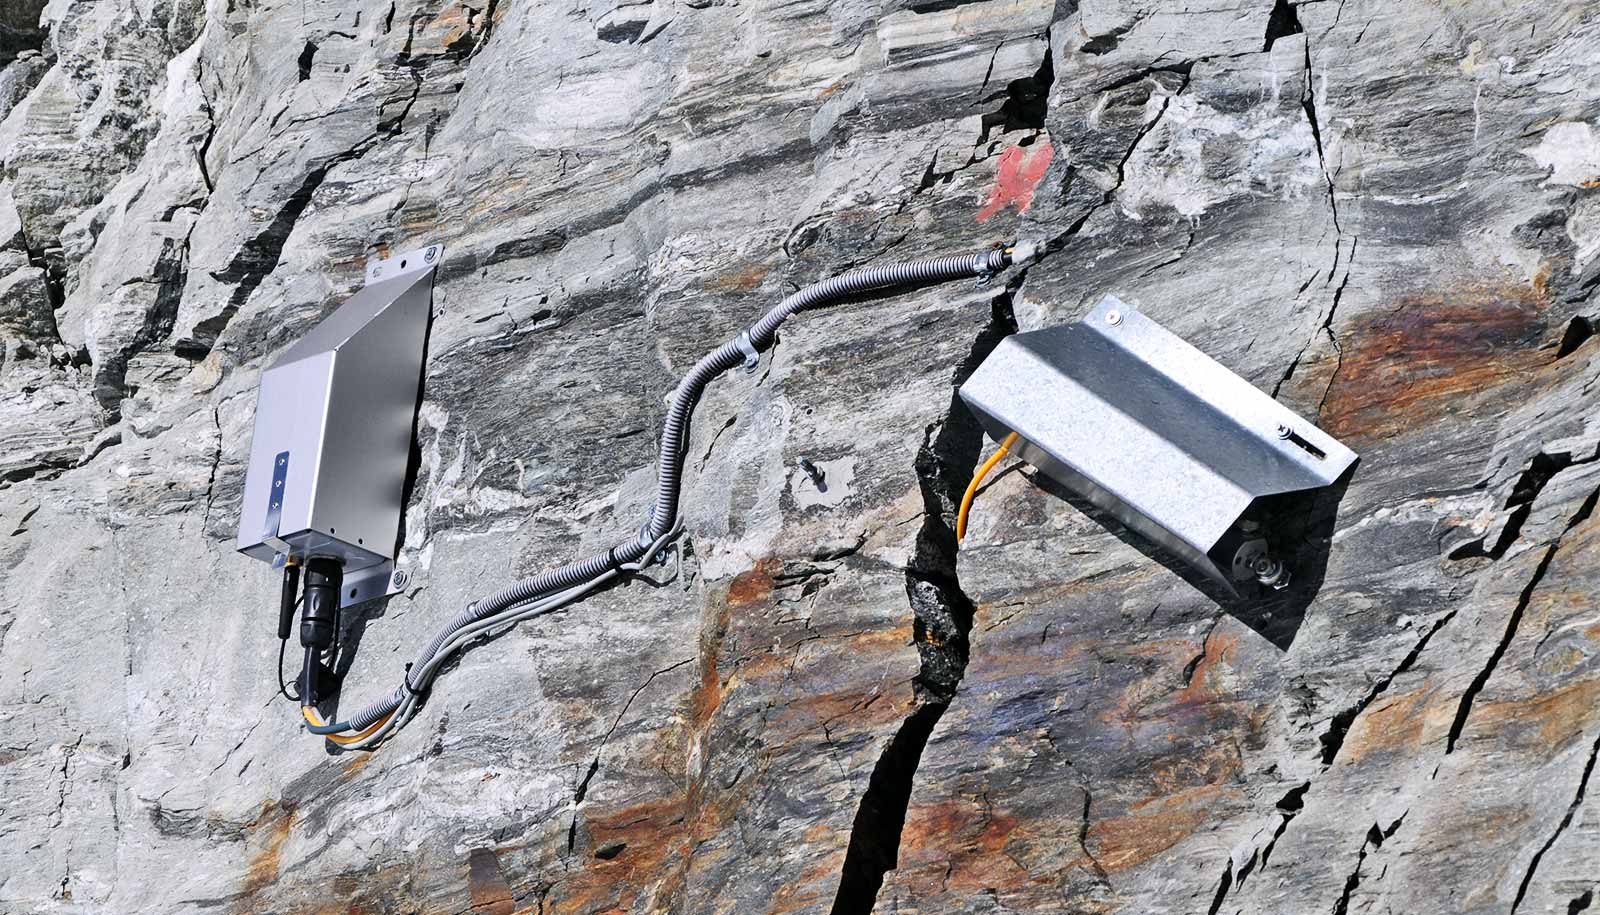 Two metal boxes attached to the rock have wires running into a crack